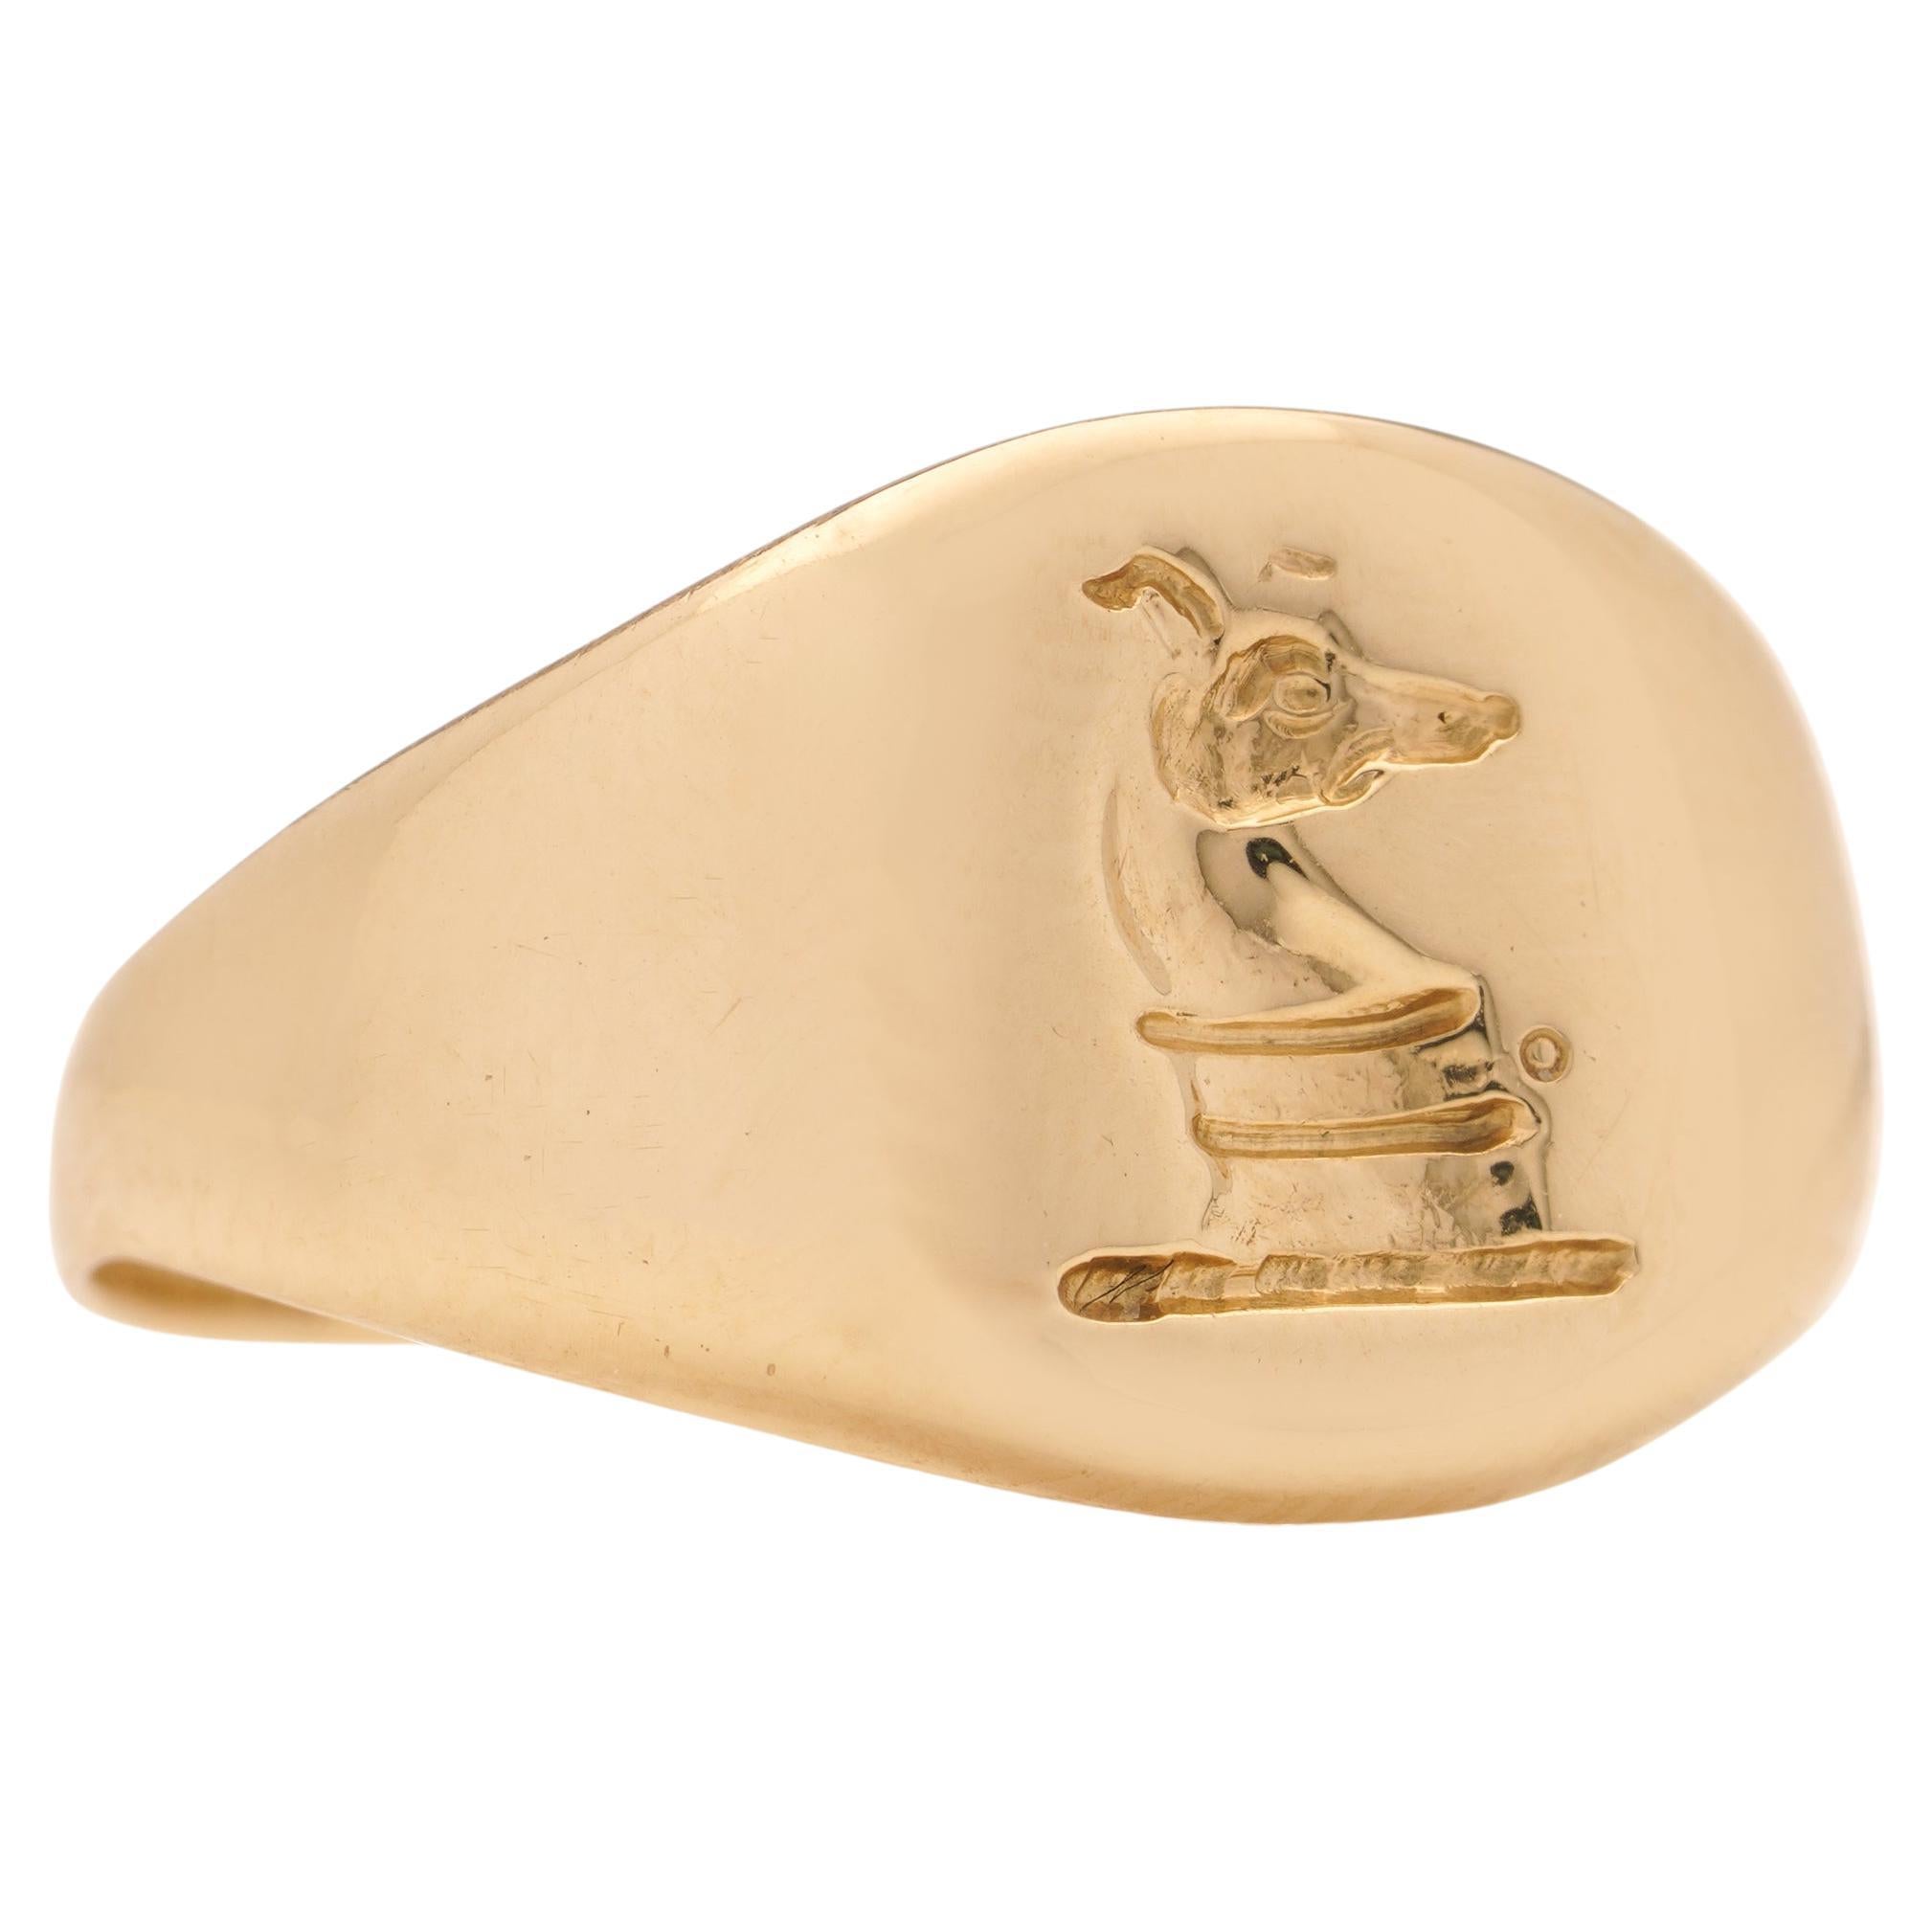 Edwardian 18kt. yellow gold pinky signet ring featuring a dog